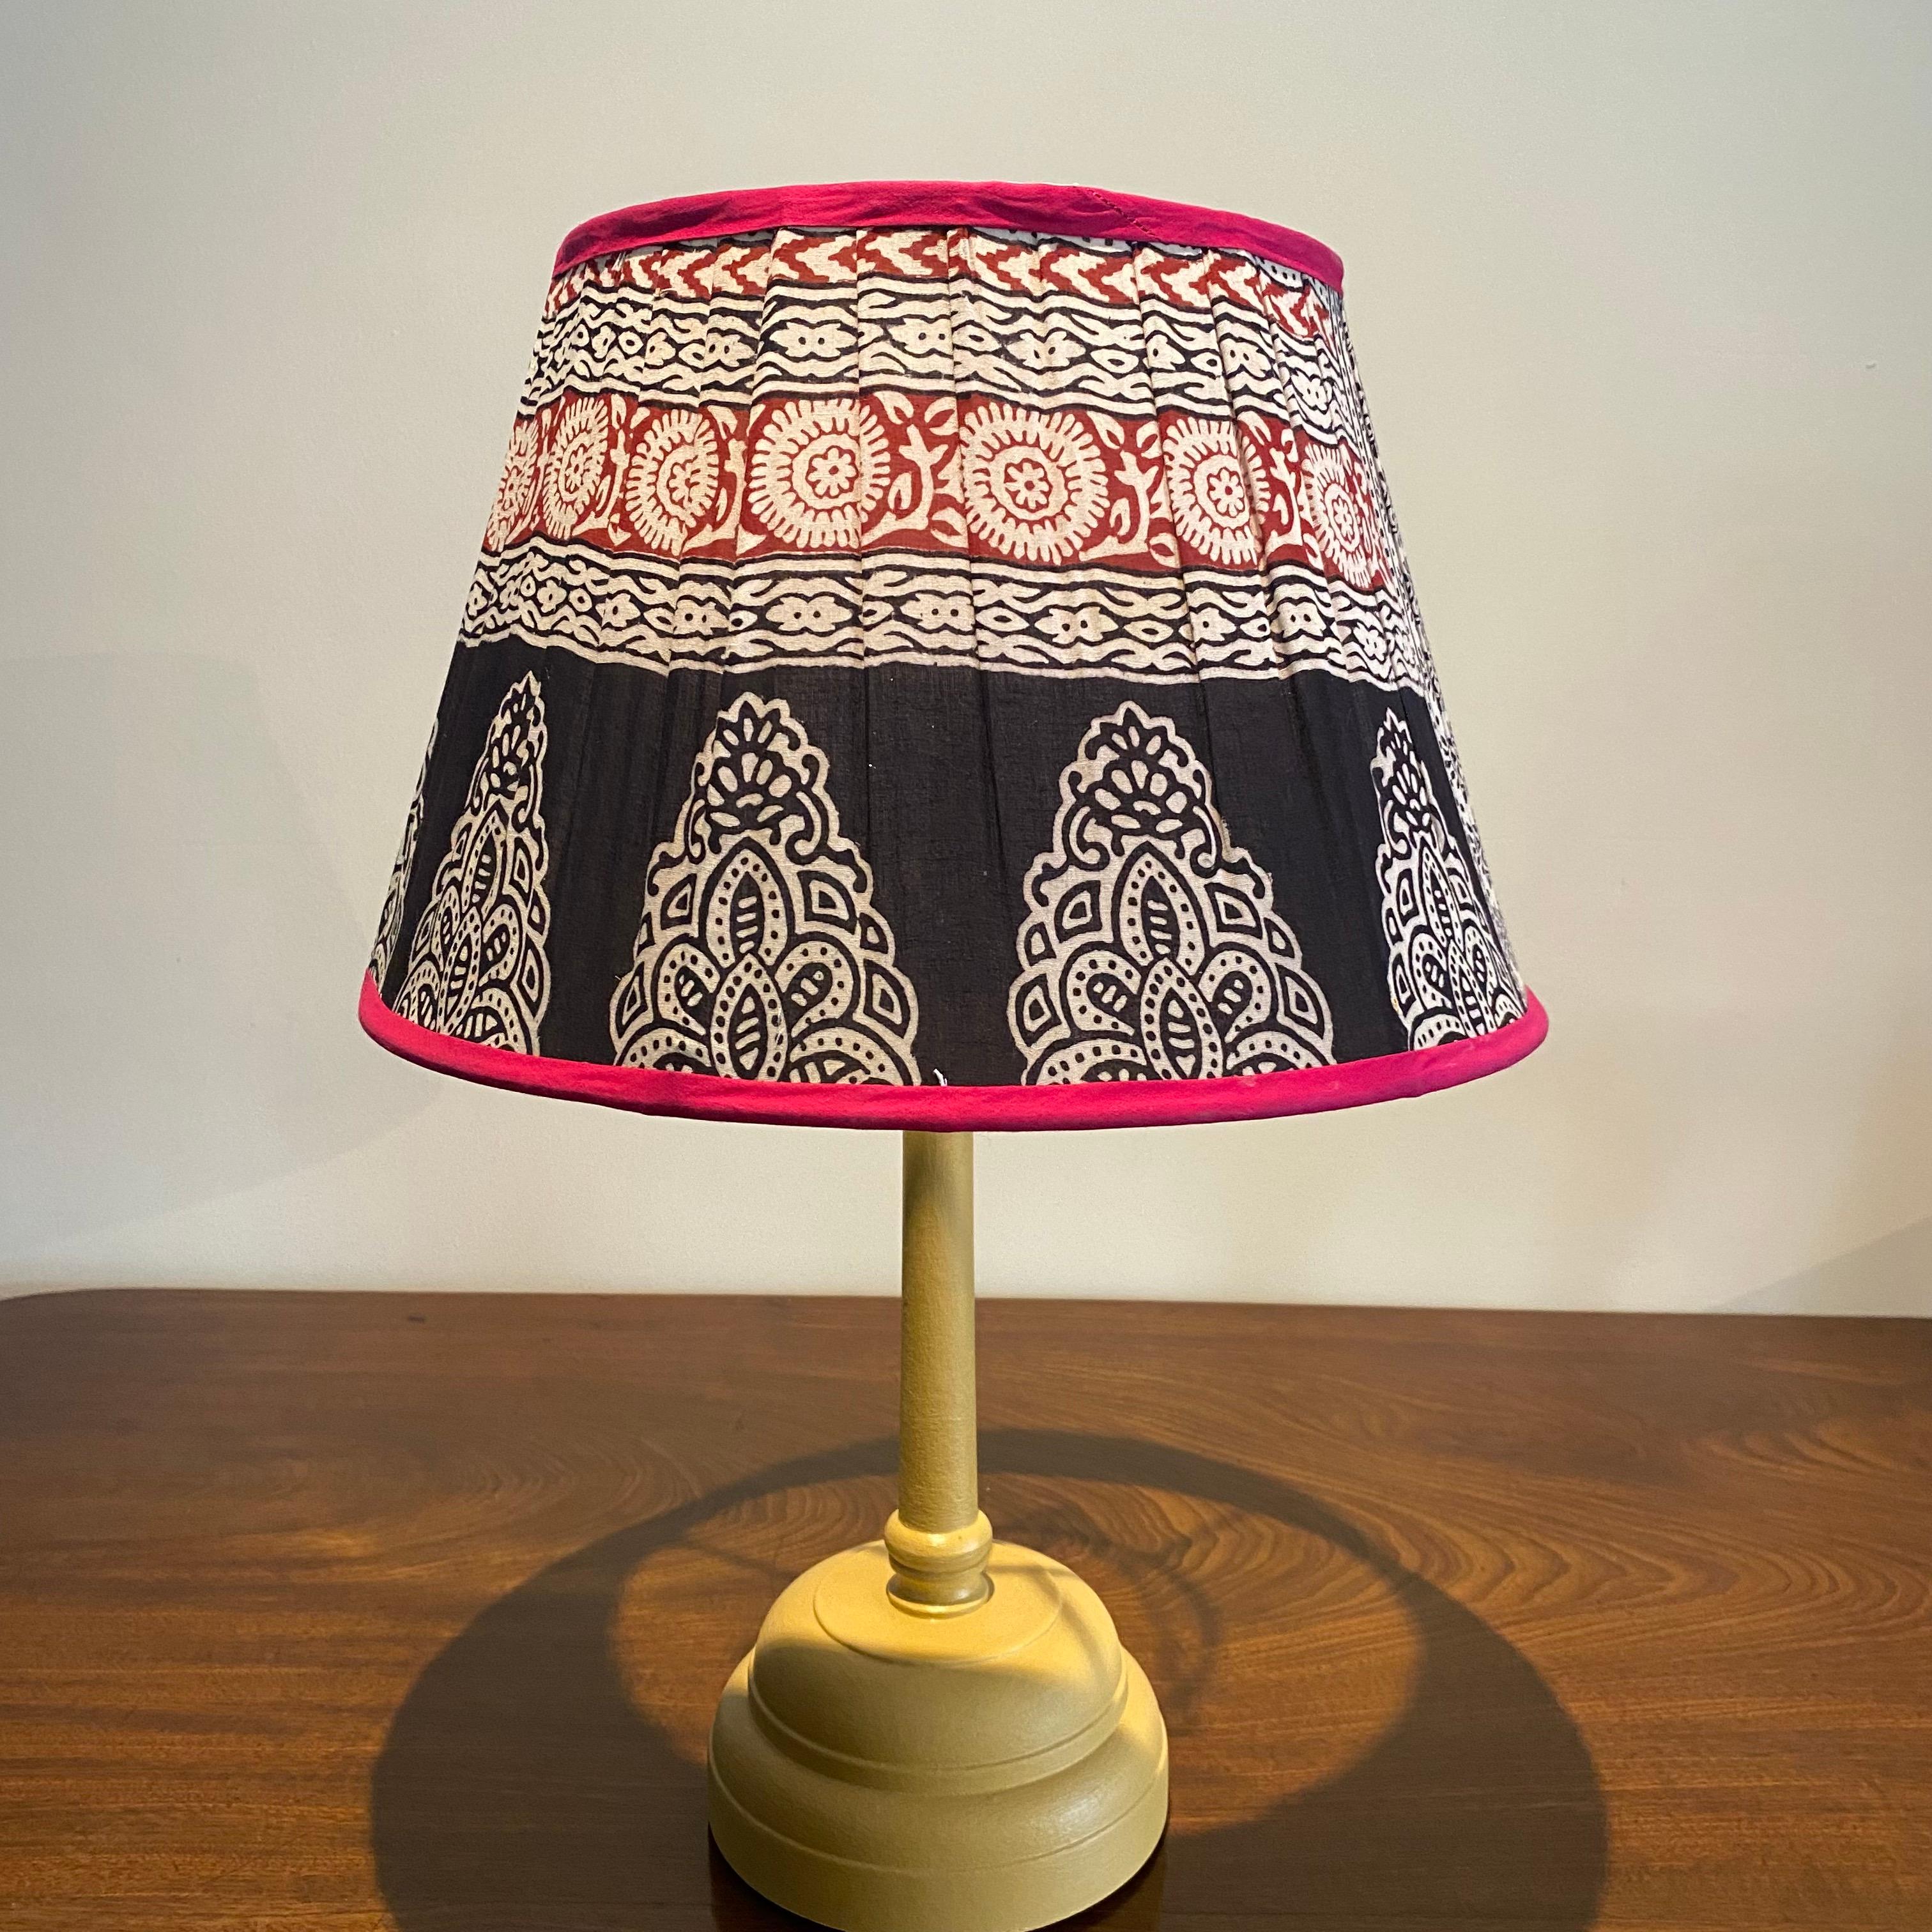 14” Indian sari lampshade with duplex fitting.

These are handmade lampshades made from Indian sari silks and cotton.

Due to the fact these shades are on display in my showroom and their delicate nature, they occasionally show signs of handling